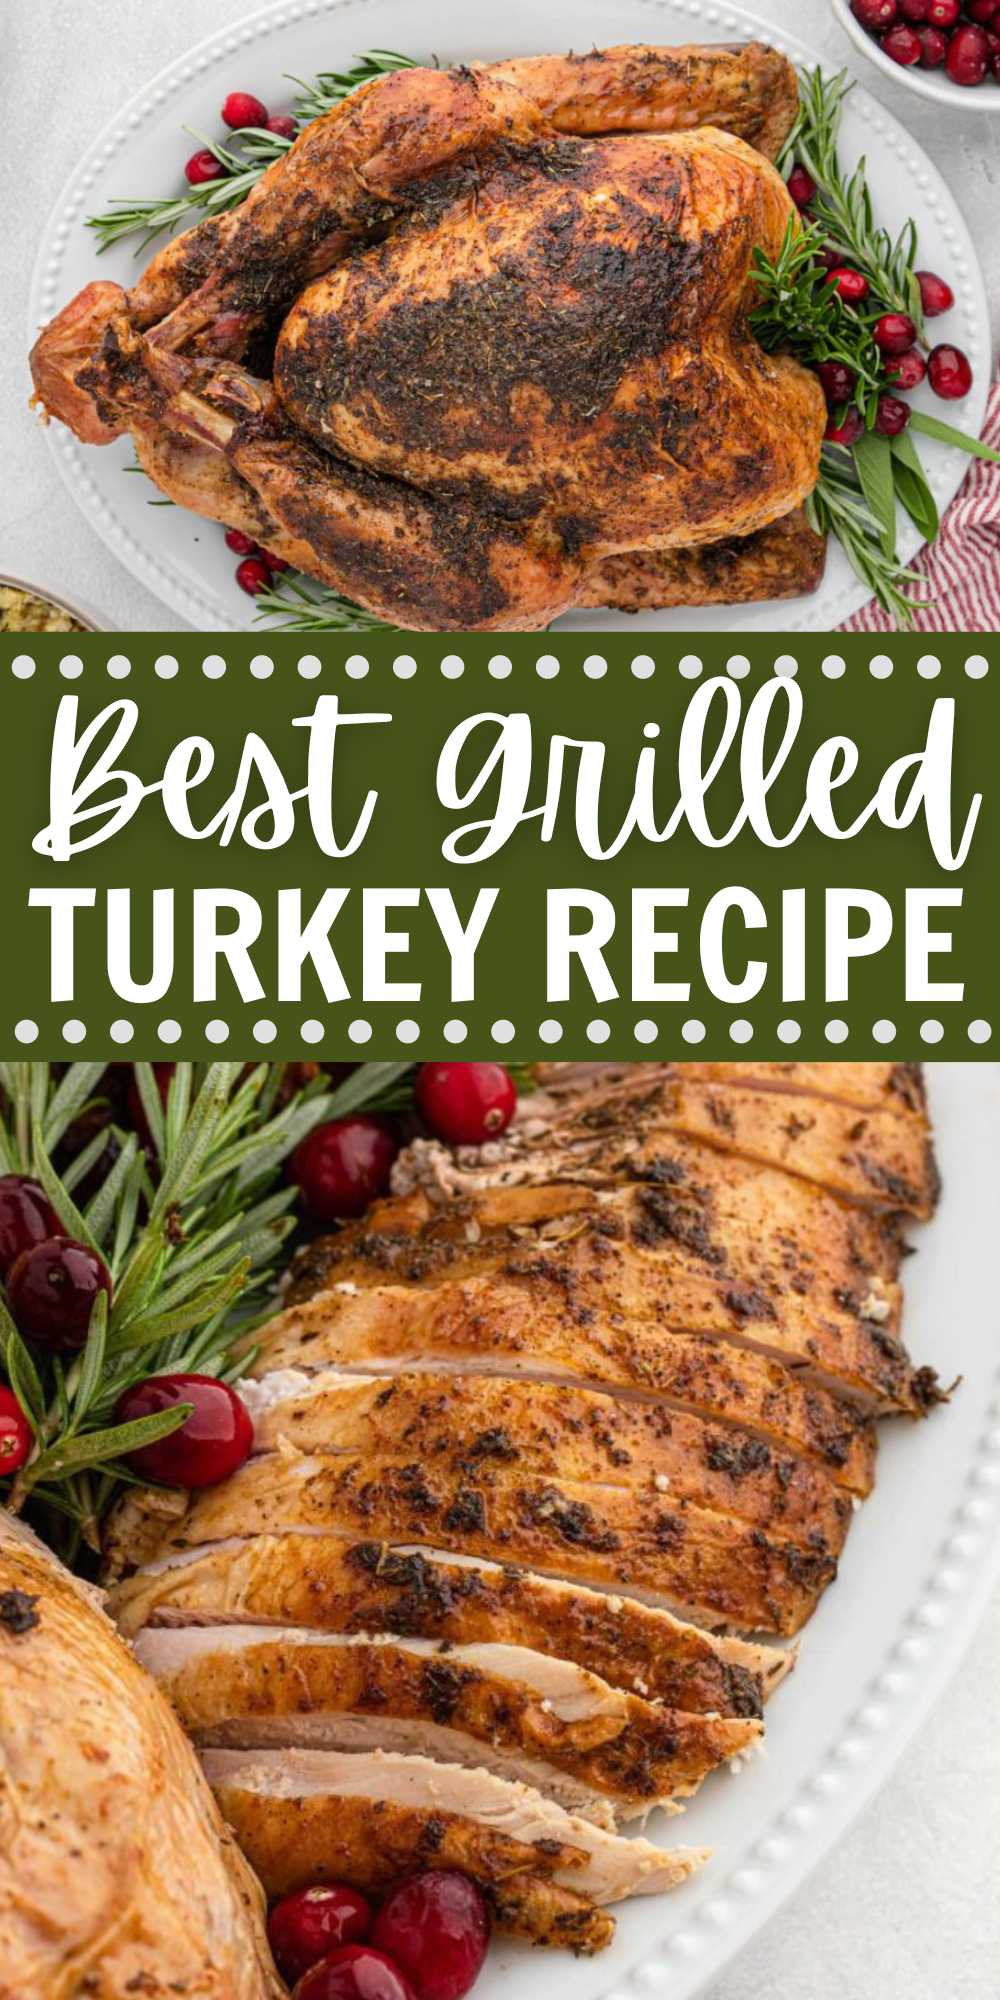 Take your Thanksgiving turkey to the next level and make Grilled Turkey. Simple seasoning makes this turkey so flavorful. We enjoy making our turkey on the grill so much that we make it throughout the year. We love to use the leftover turkey for sandwiches, casseroles and more. #eatingonadime #grilledturkey #turkeyrecipe